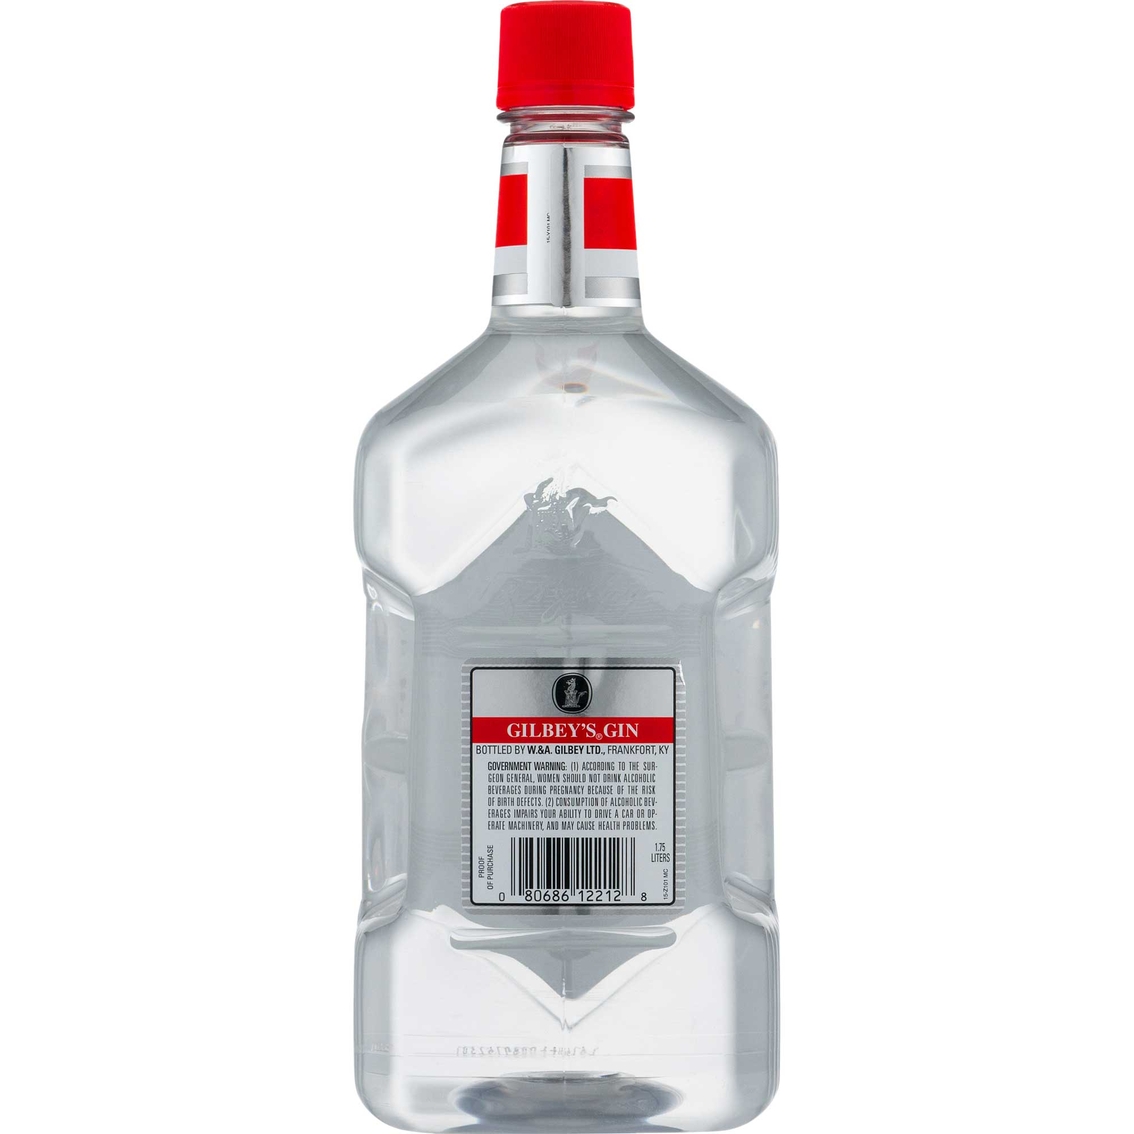 Gilbey's Gin 1.75L - Image 2 of 2